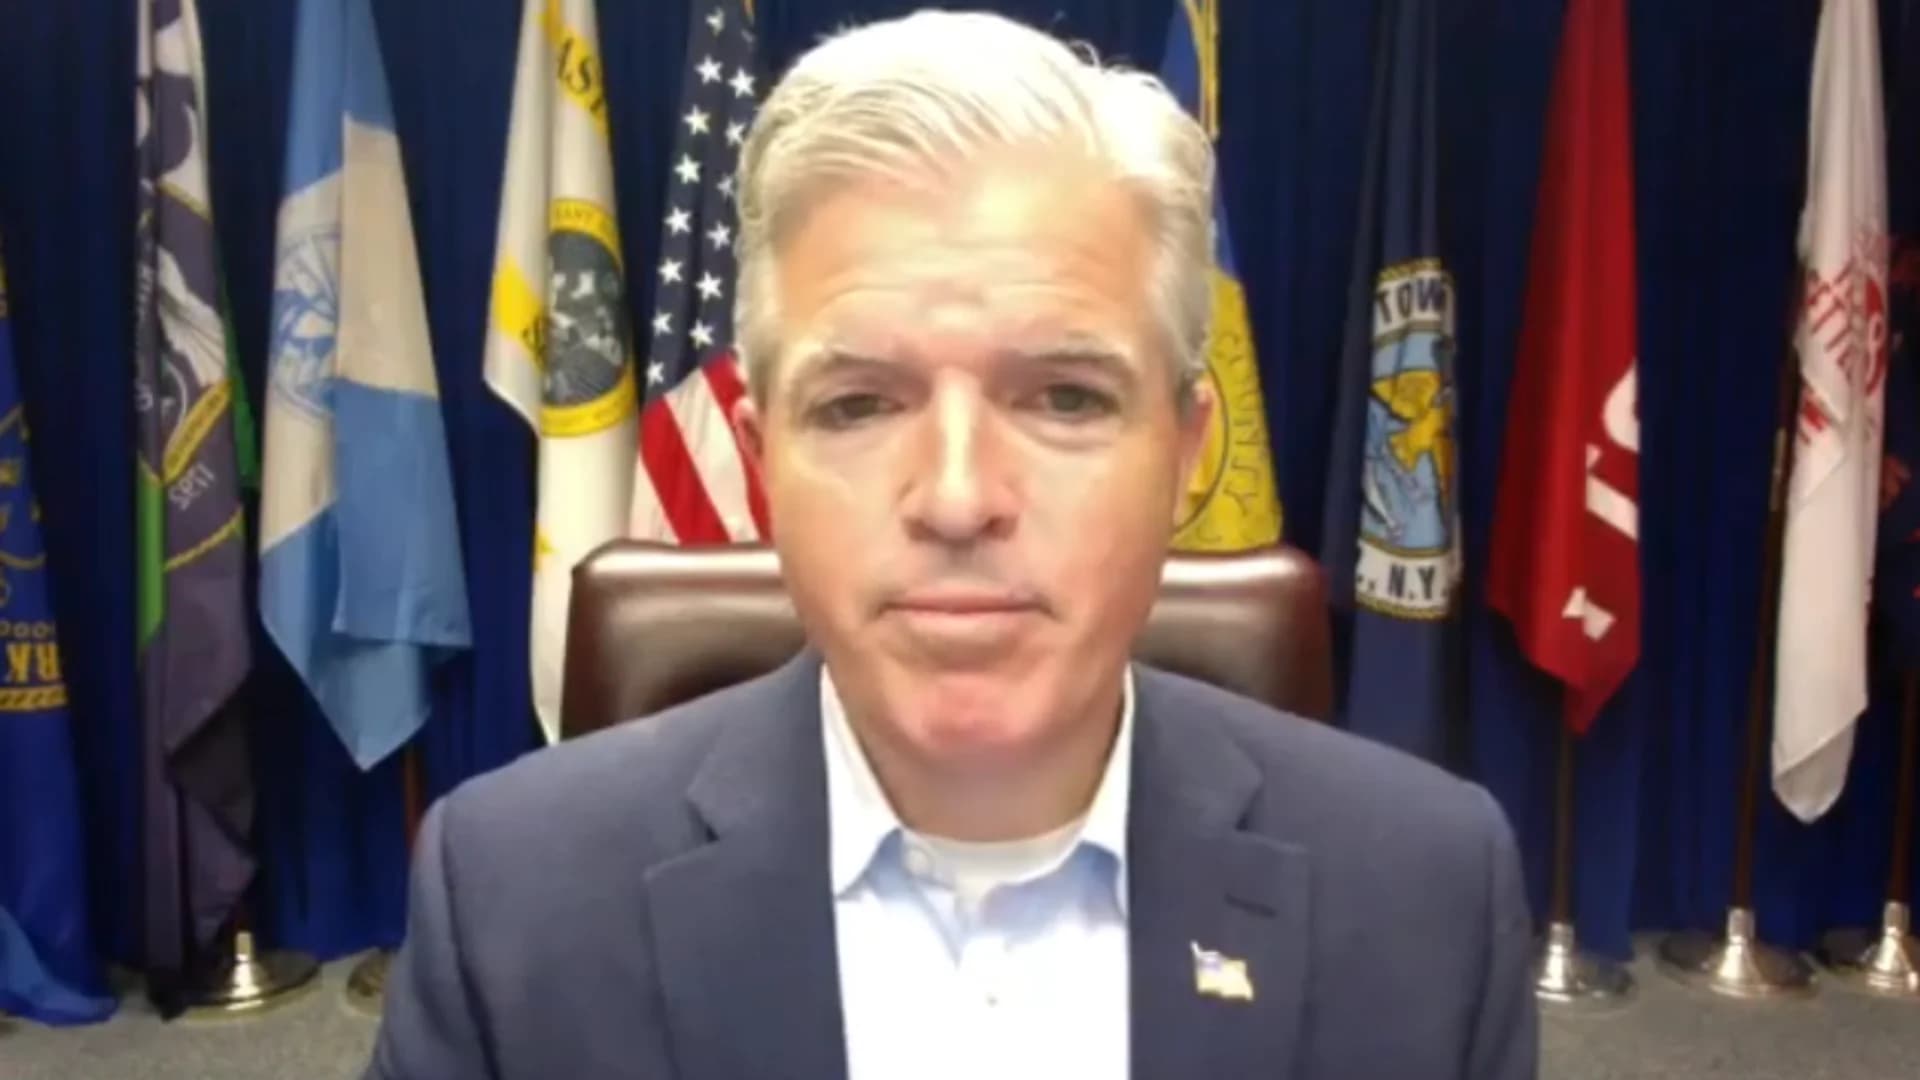 Suffolk County Executive Bellone says 'structural racism' to blame in Floyd killing, other incidents